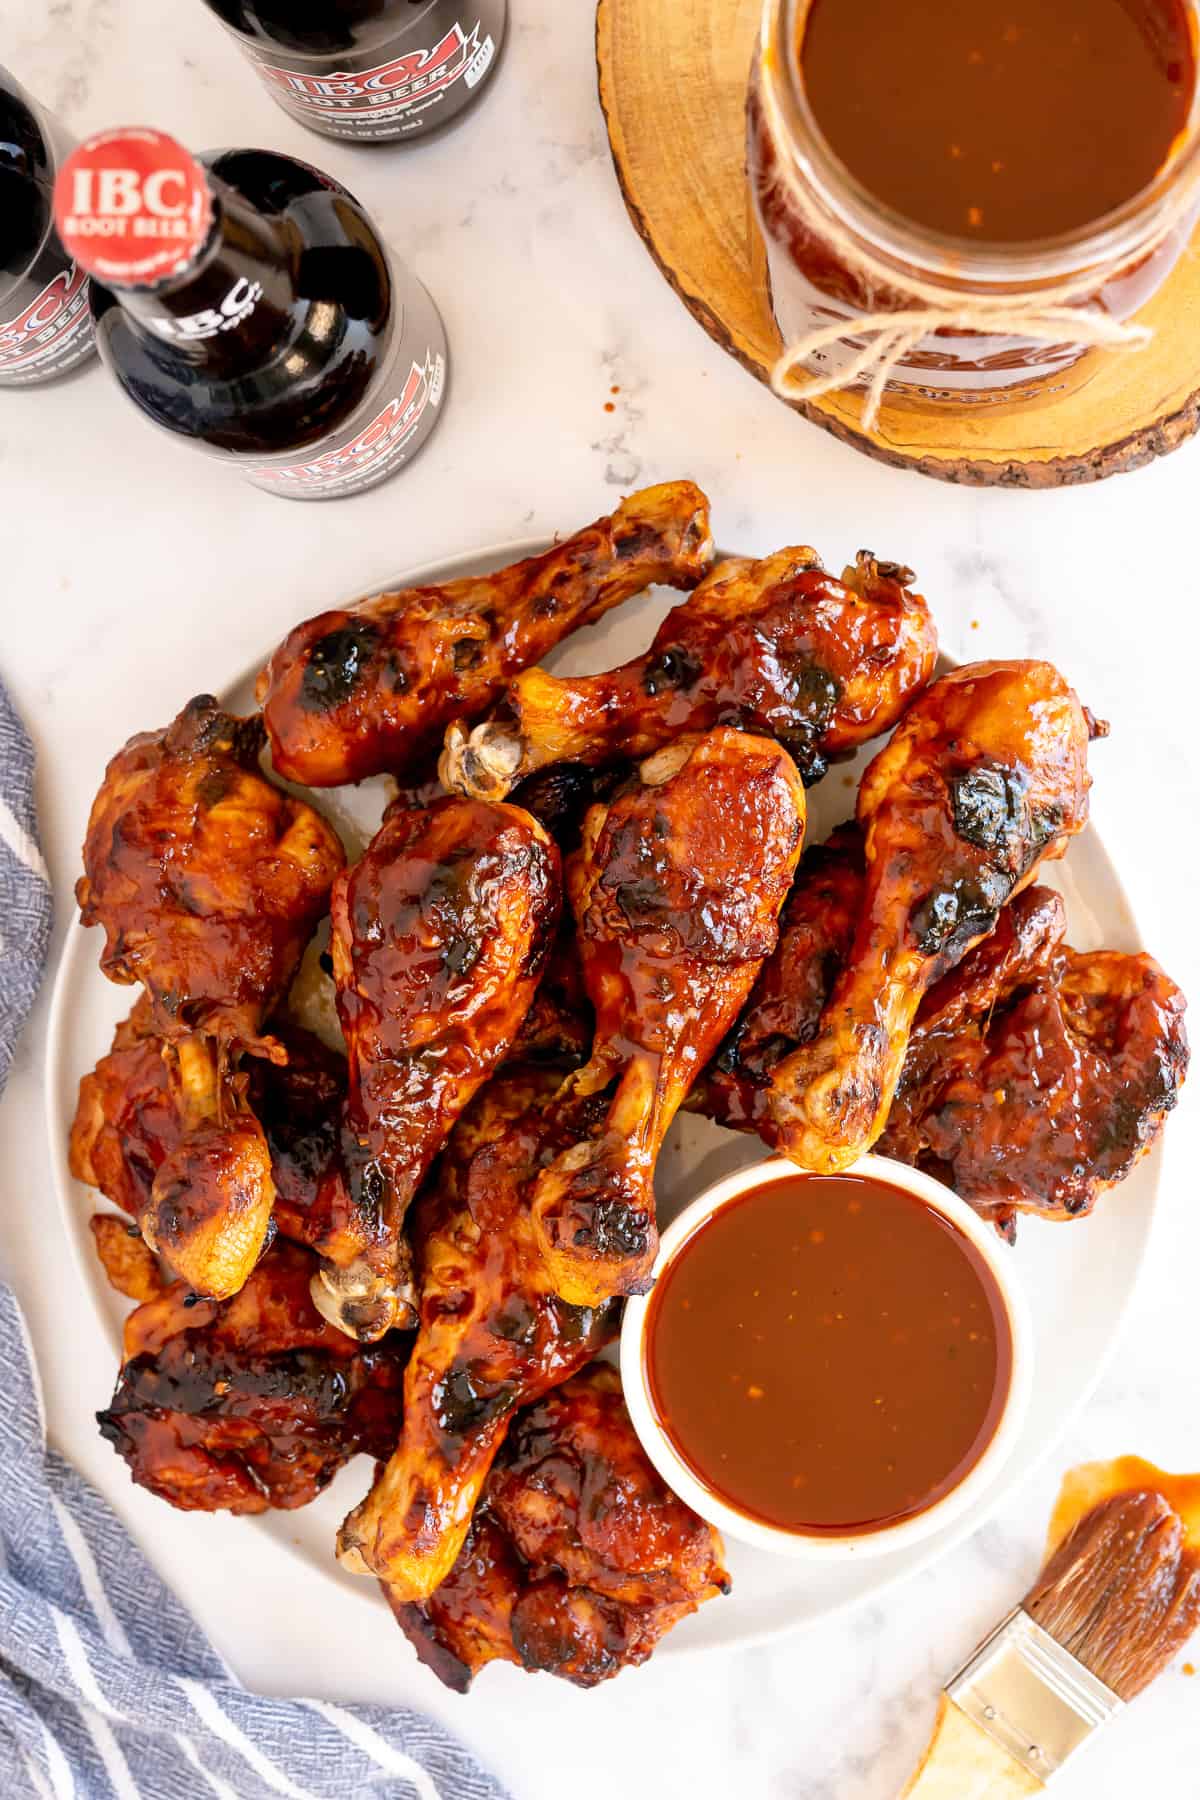 A platter of BBQ chicken with BBQ sauce.